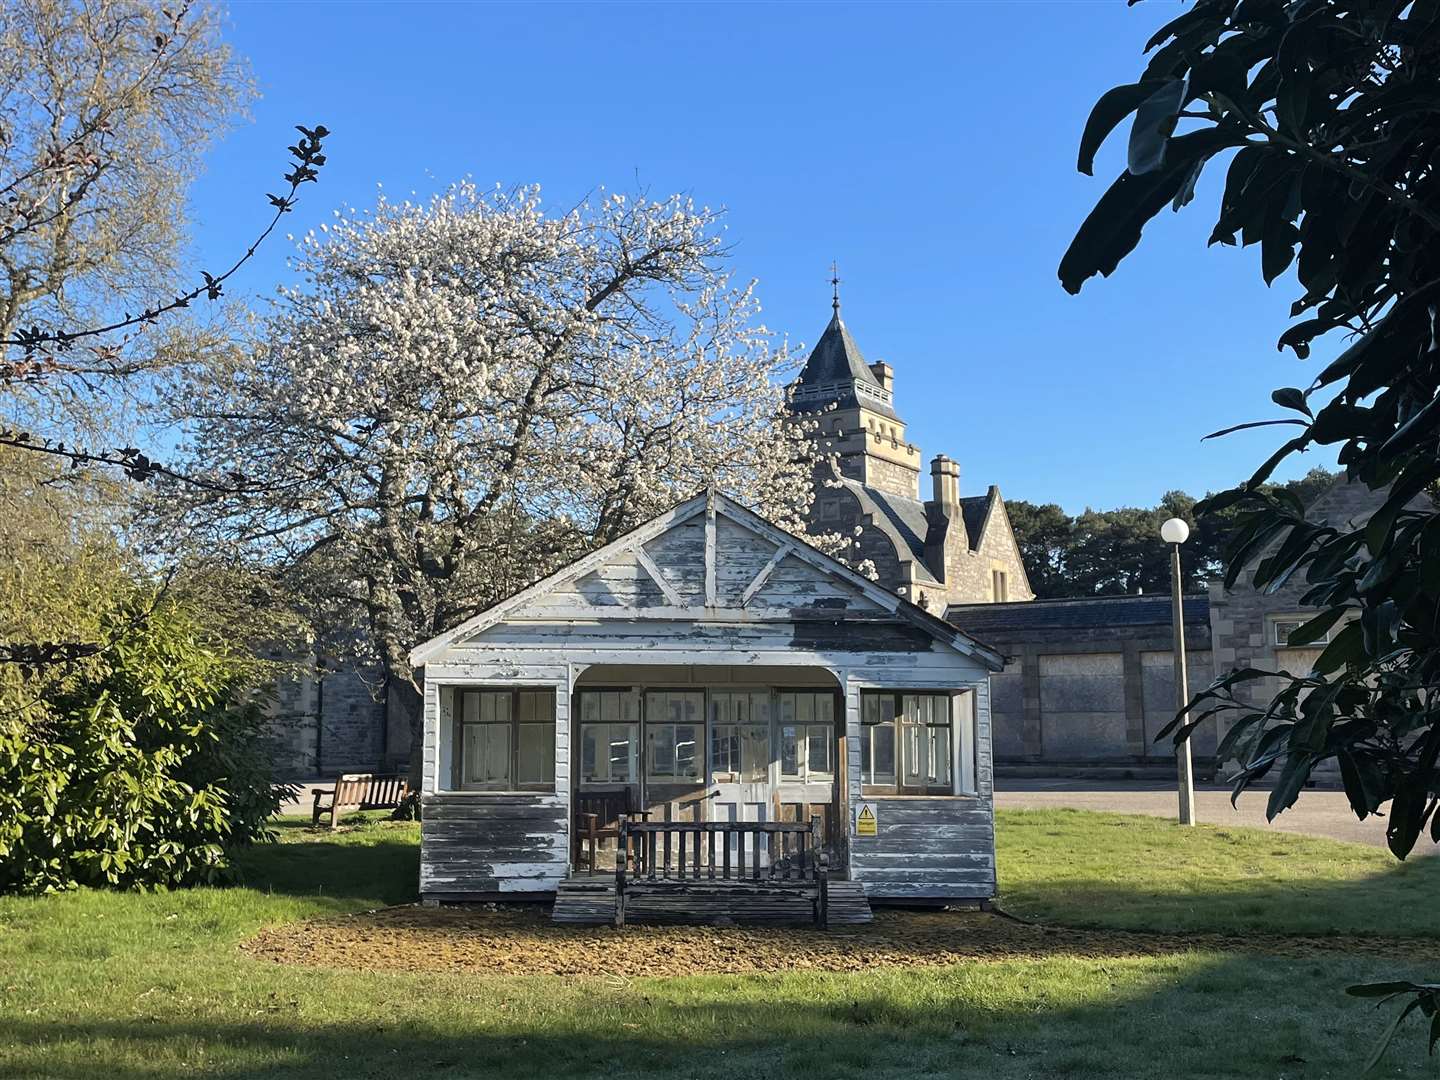 The once-popular summer house allowed for patients and staff to enjoy fresh air.